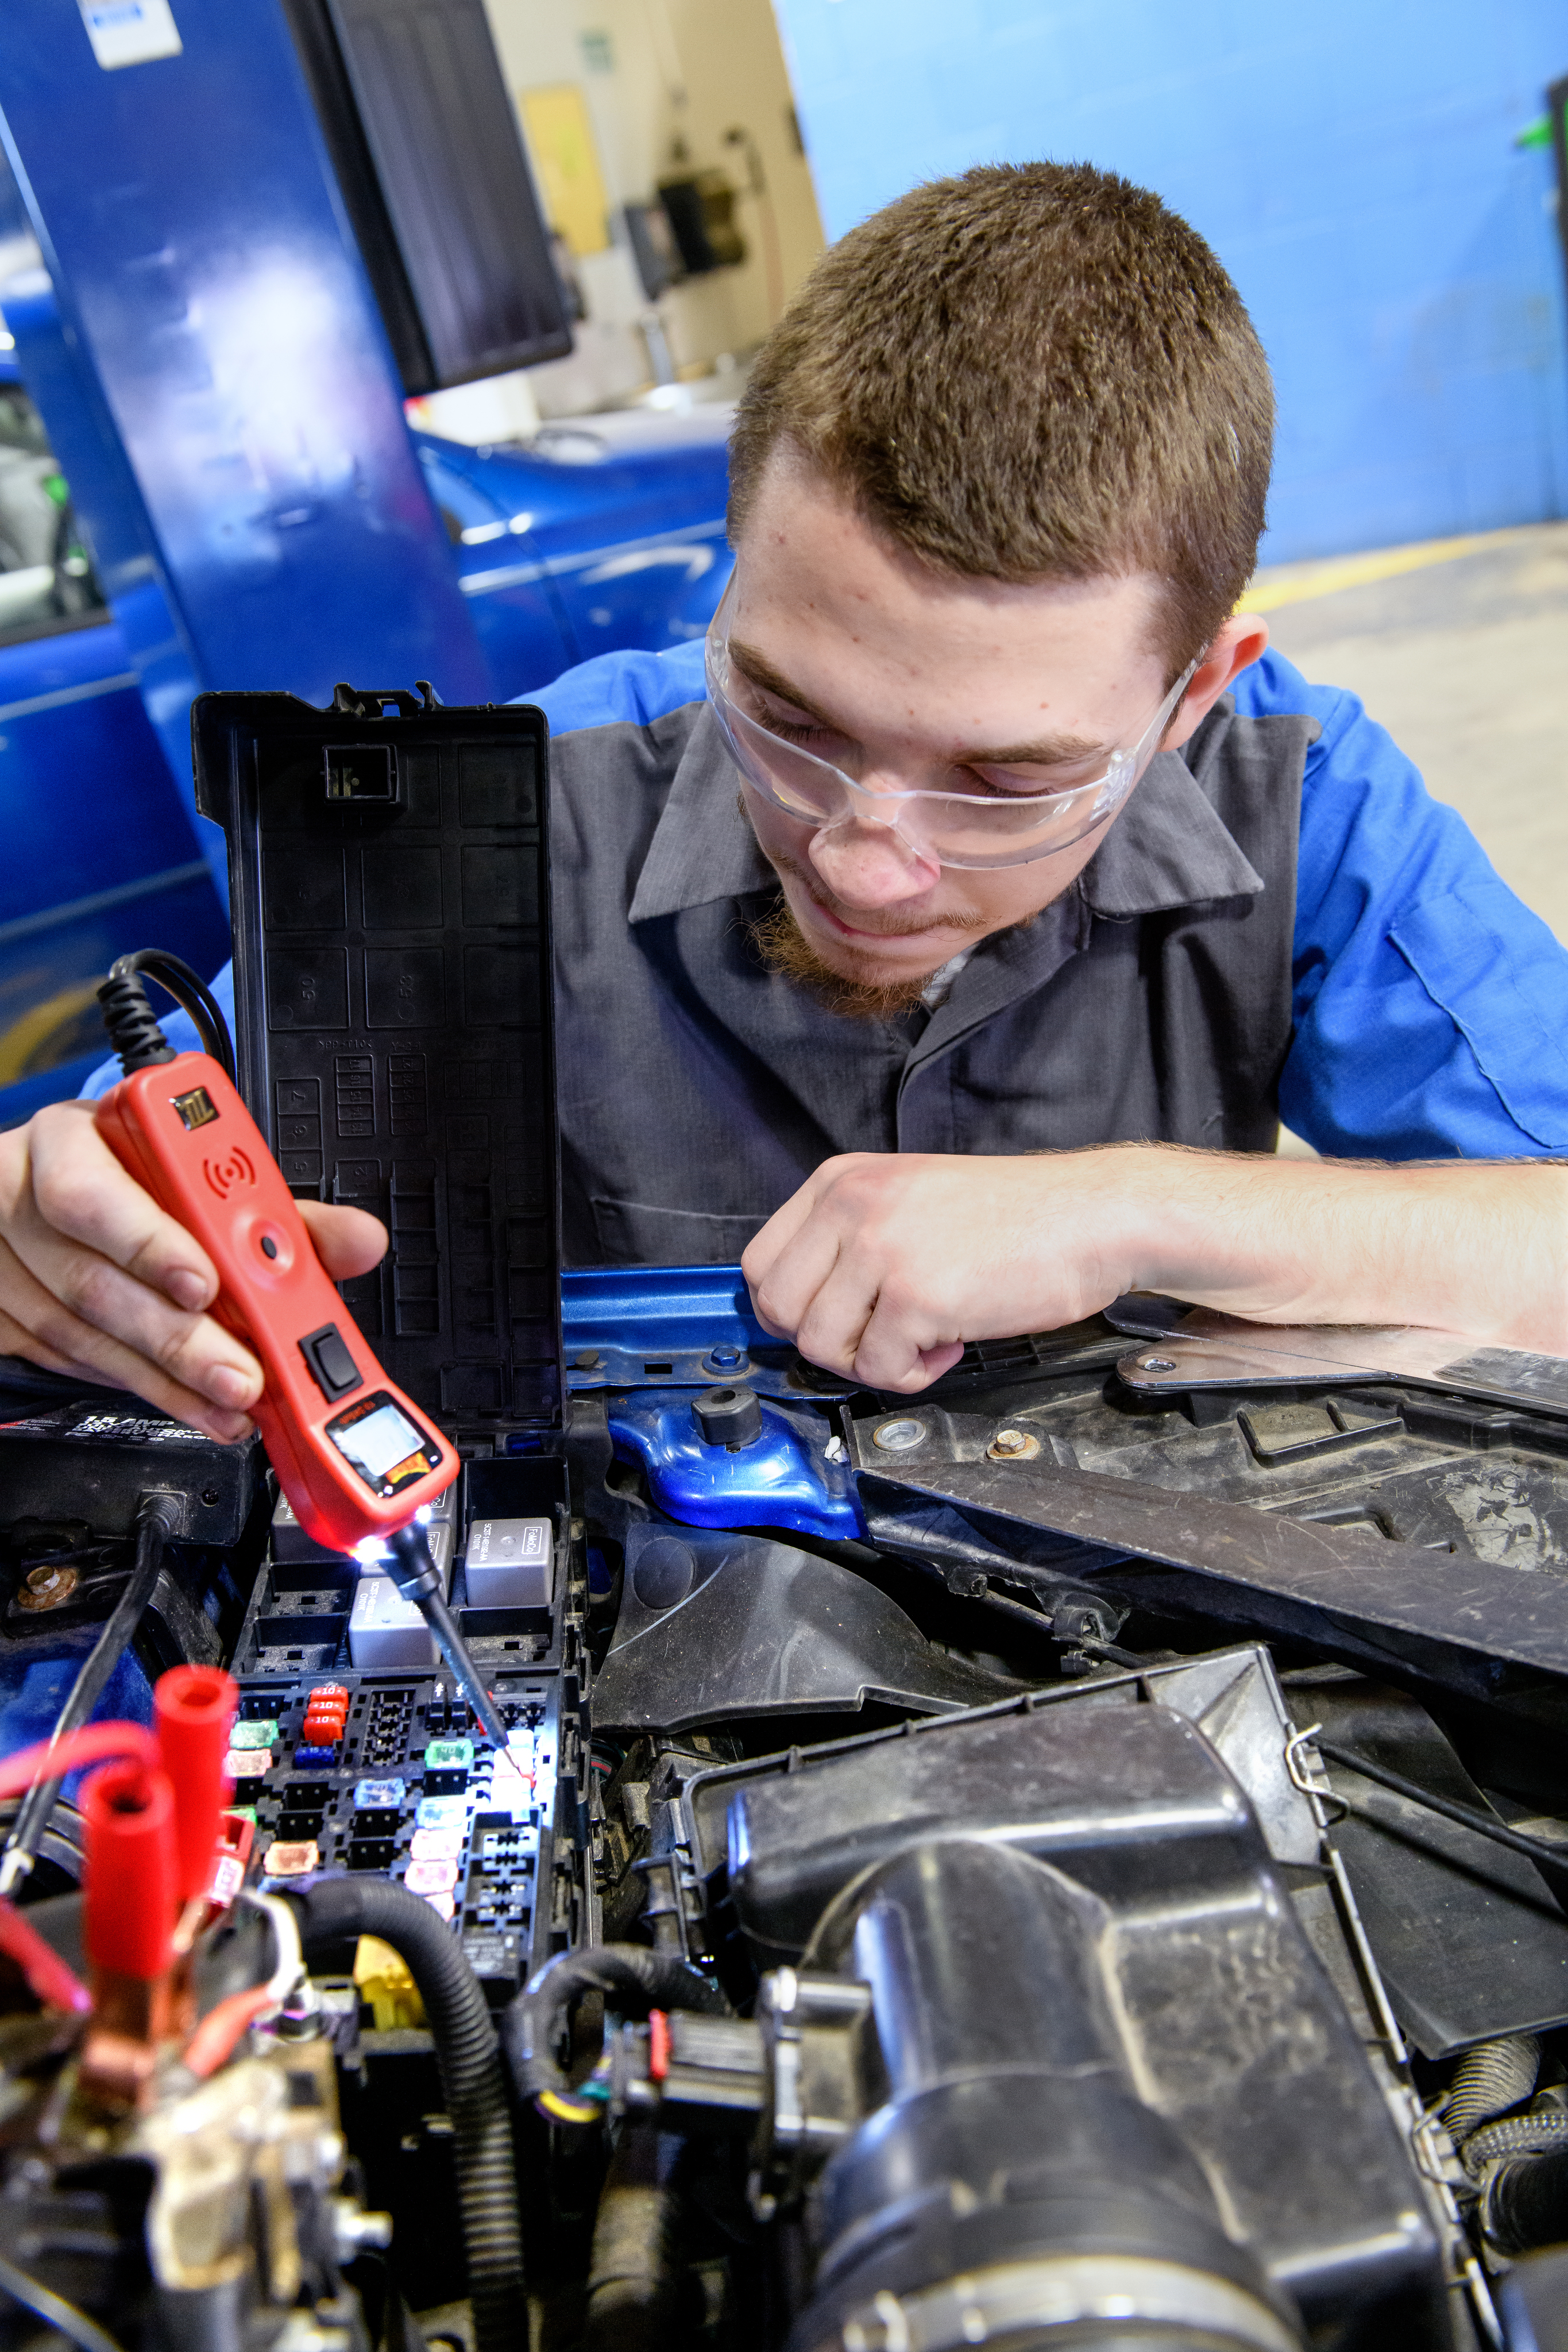 Male automotive technology student using an instrument to test a car battery under the hood of a blue car.